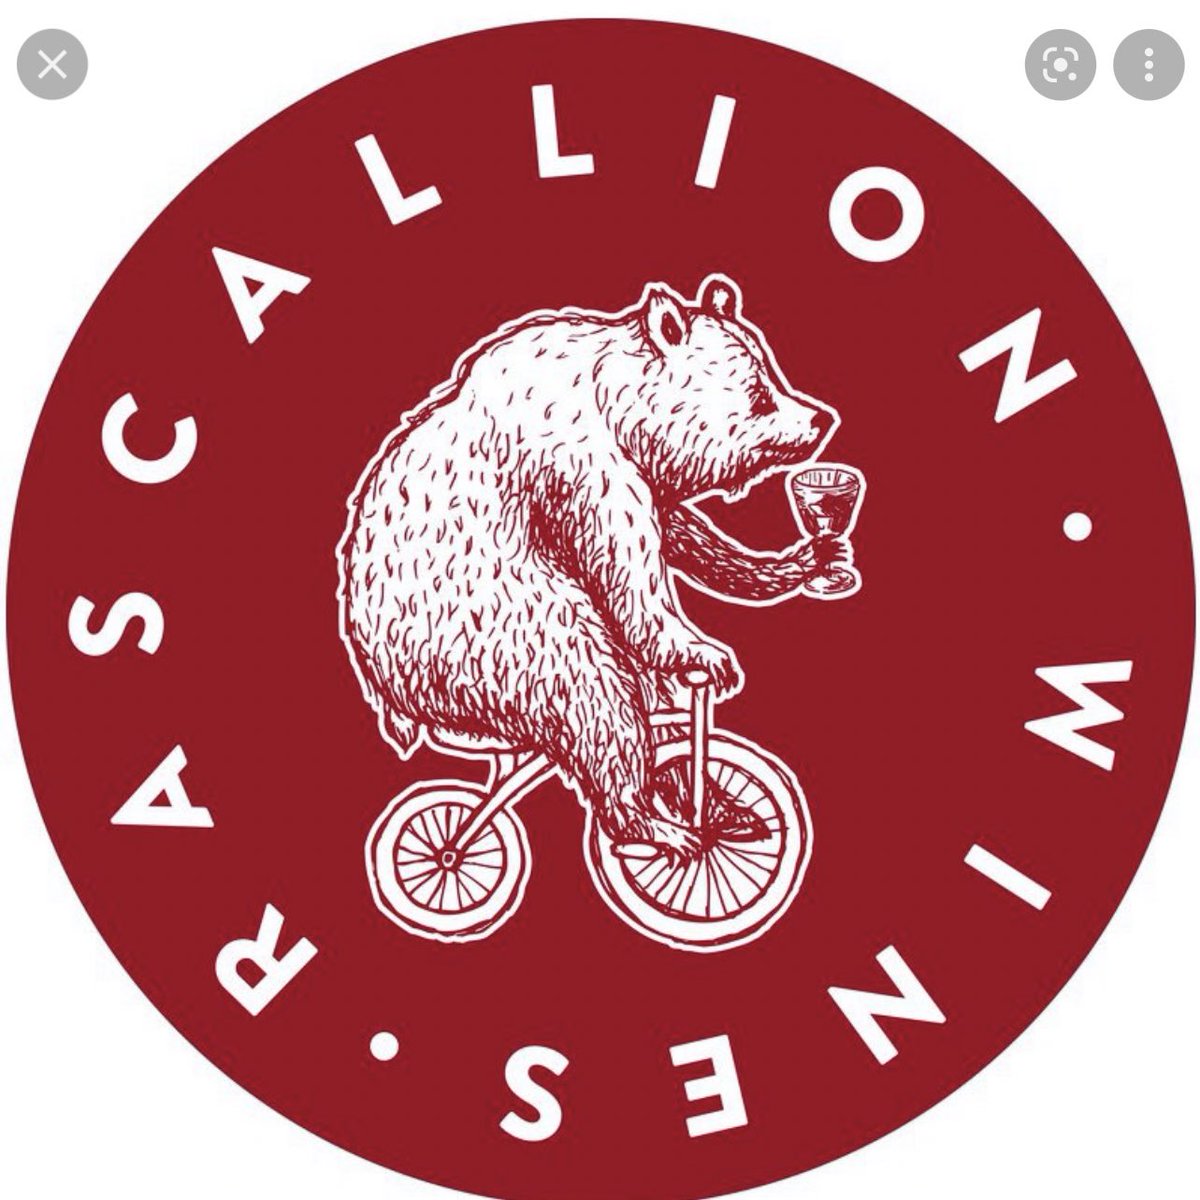 South Africa’s @rascallionwines is seeking a new production & business partner as co-owner, David Kretzmar, exits the business. Opportunity to access sales agency agreements in key export markets (eg Canada, Japan & the UK) & national/ regional accounts in South Africa.